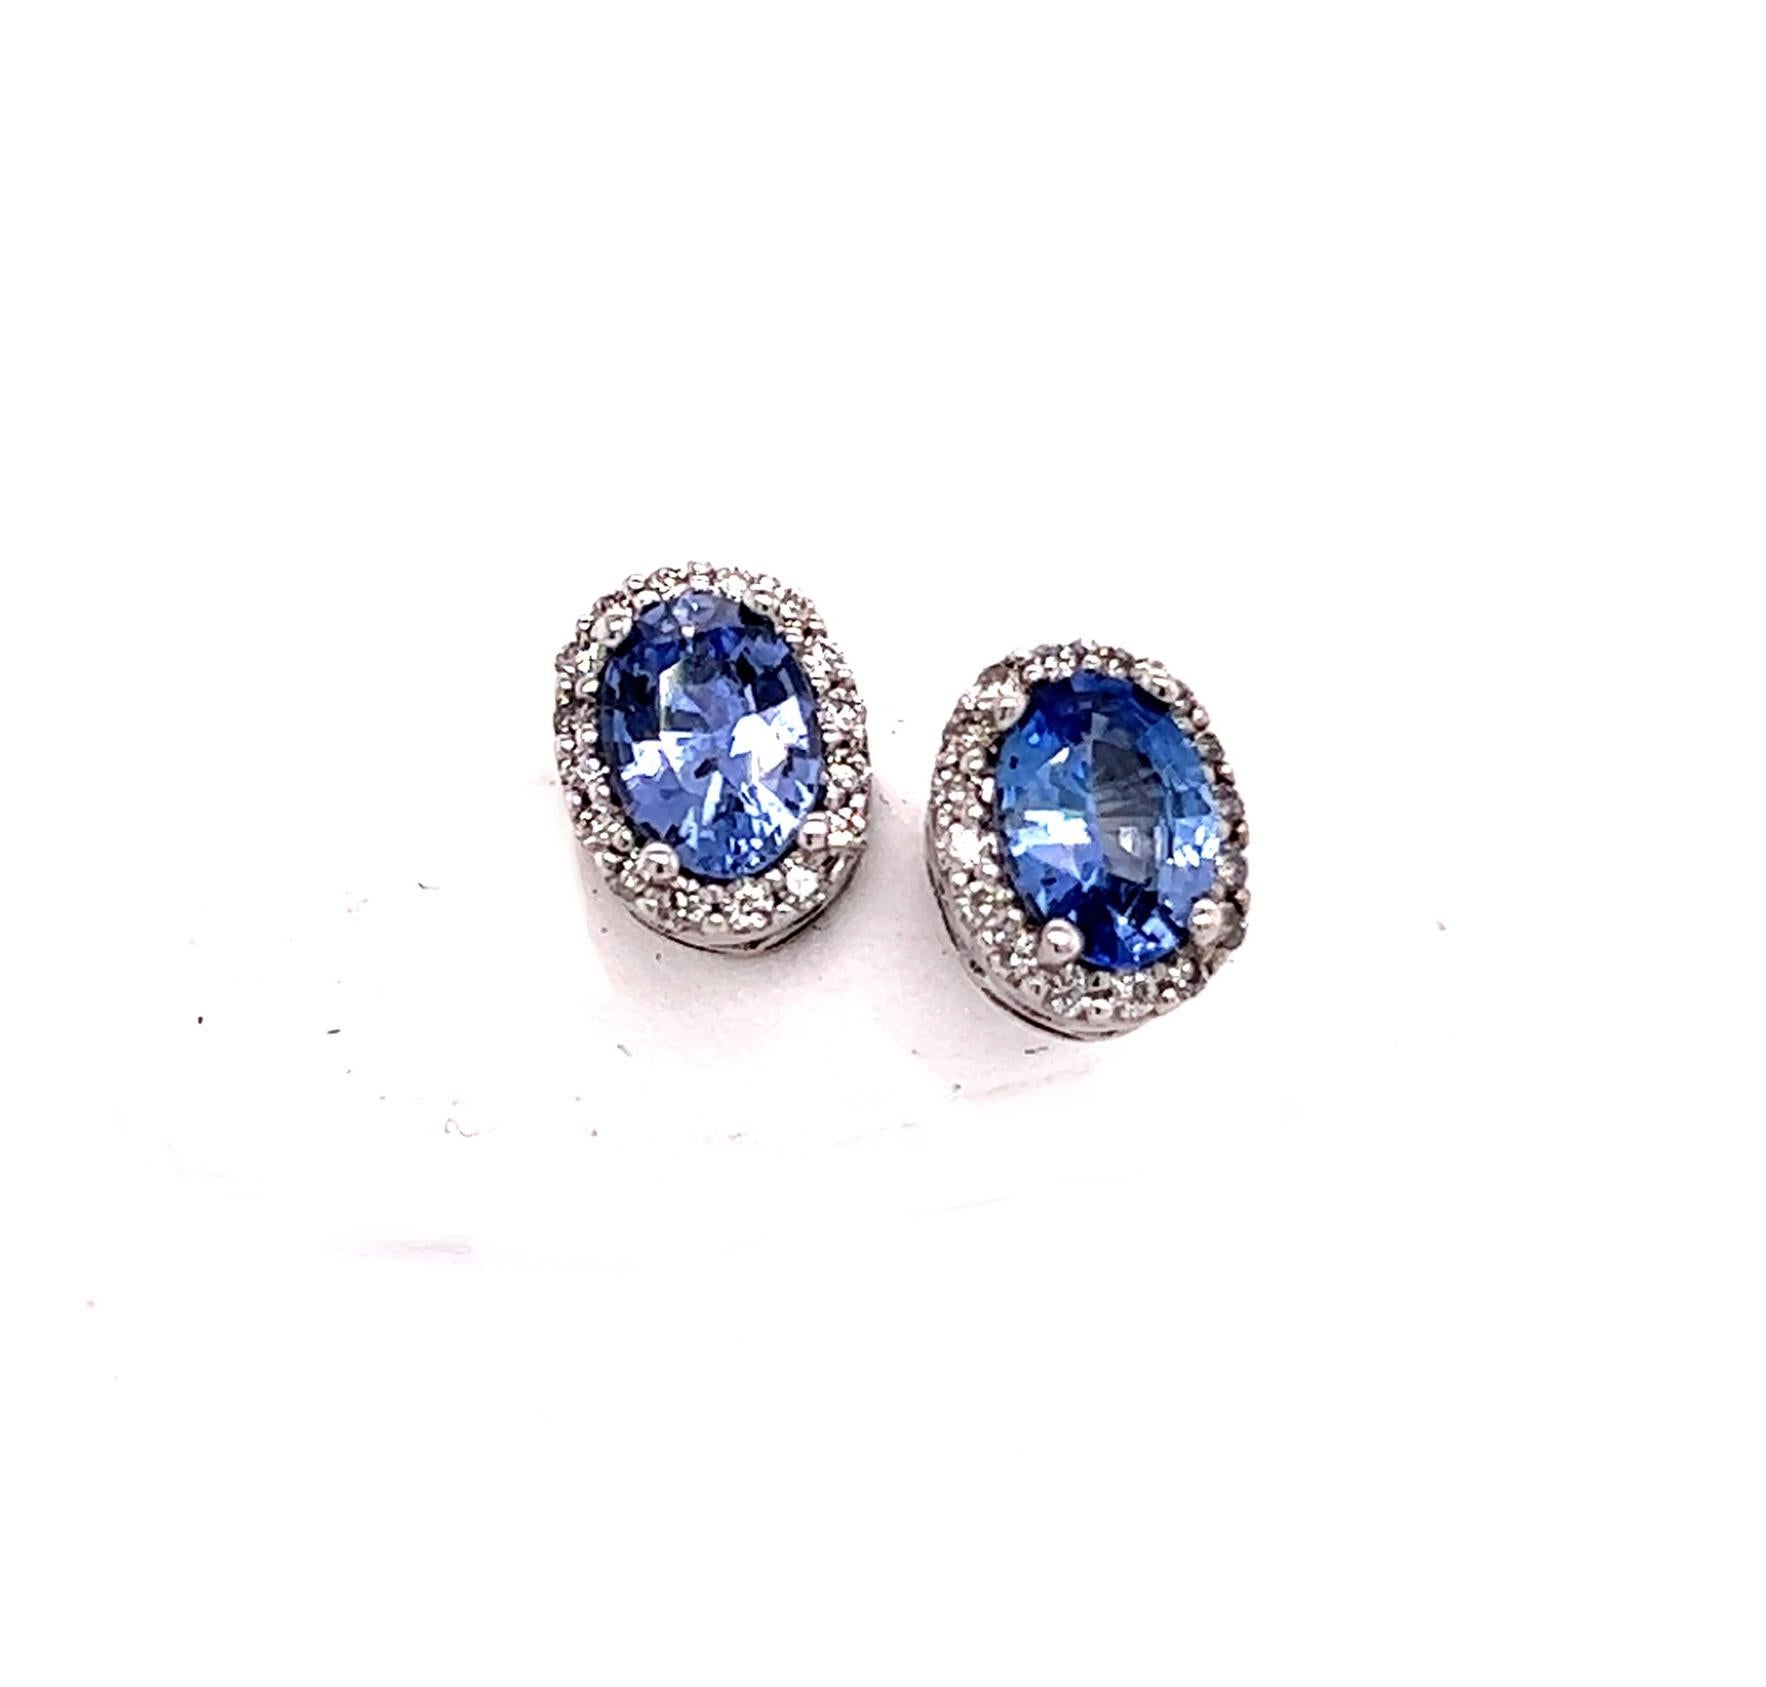 Oval Cut Natural Sapphire Diamond Earrings 14k Gold 1.73 TCW Certified For Sale